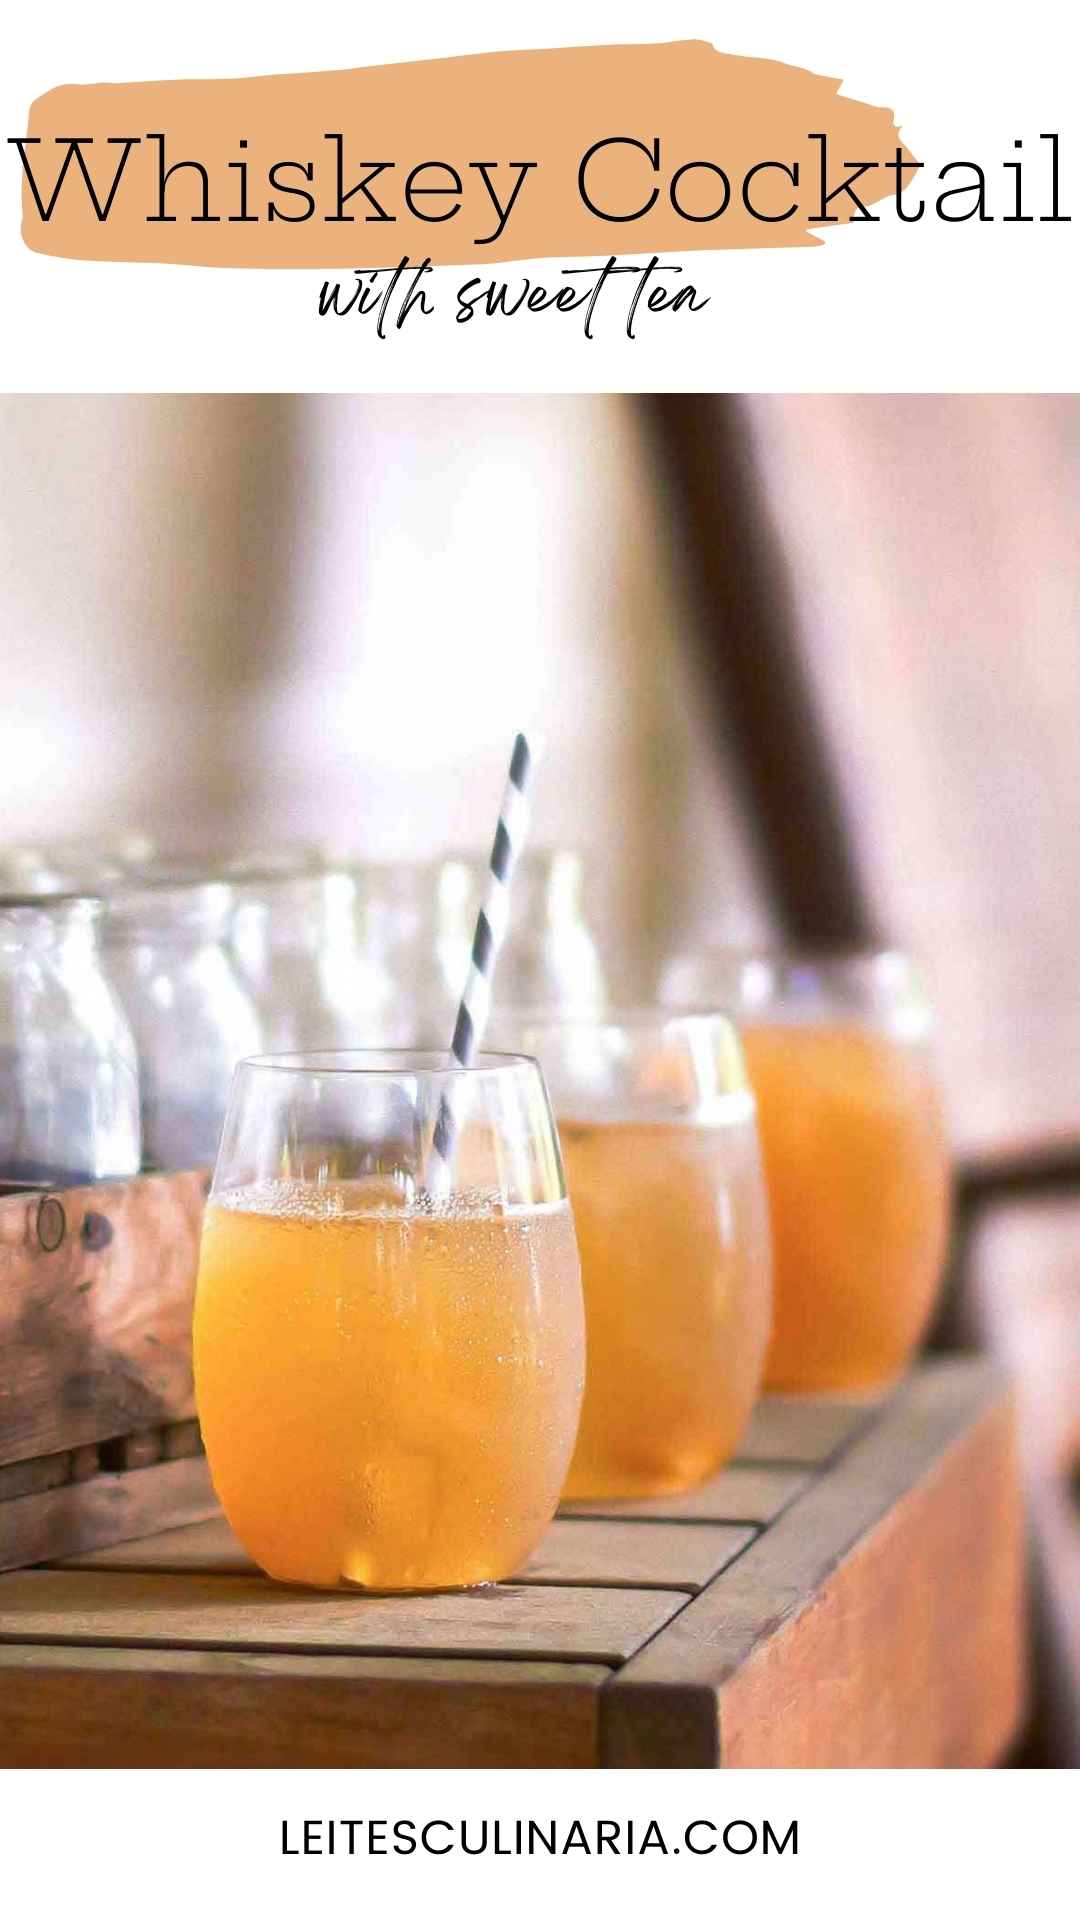 Three glasses filled with sweet tea cocktail, with a straw sticking out of one glass.